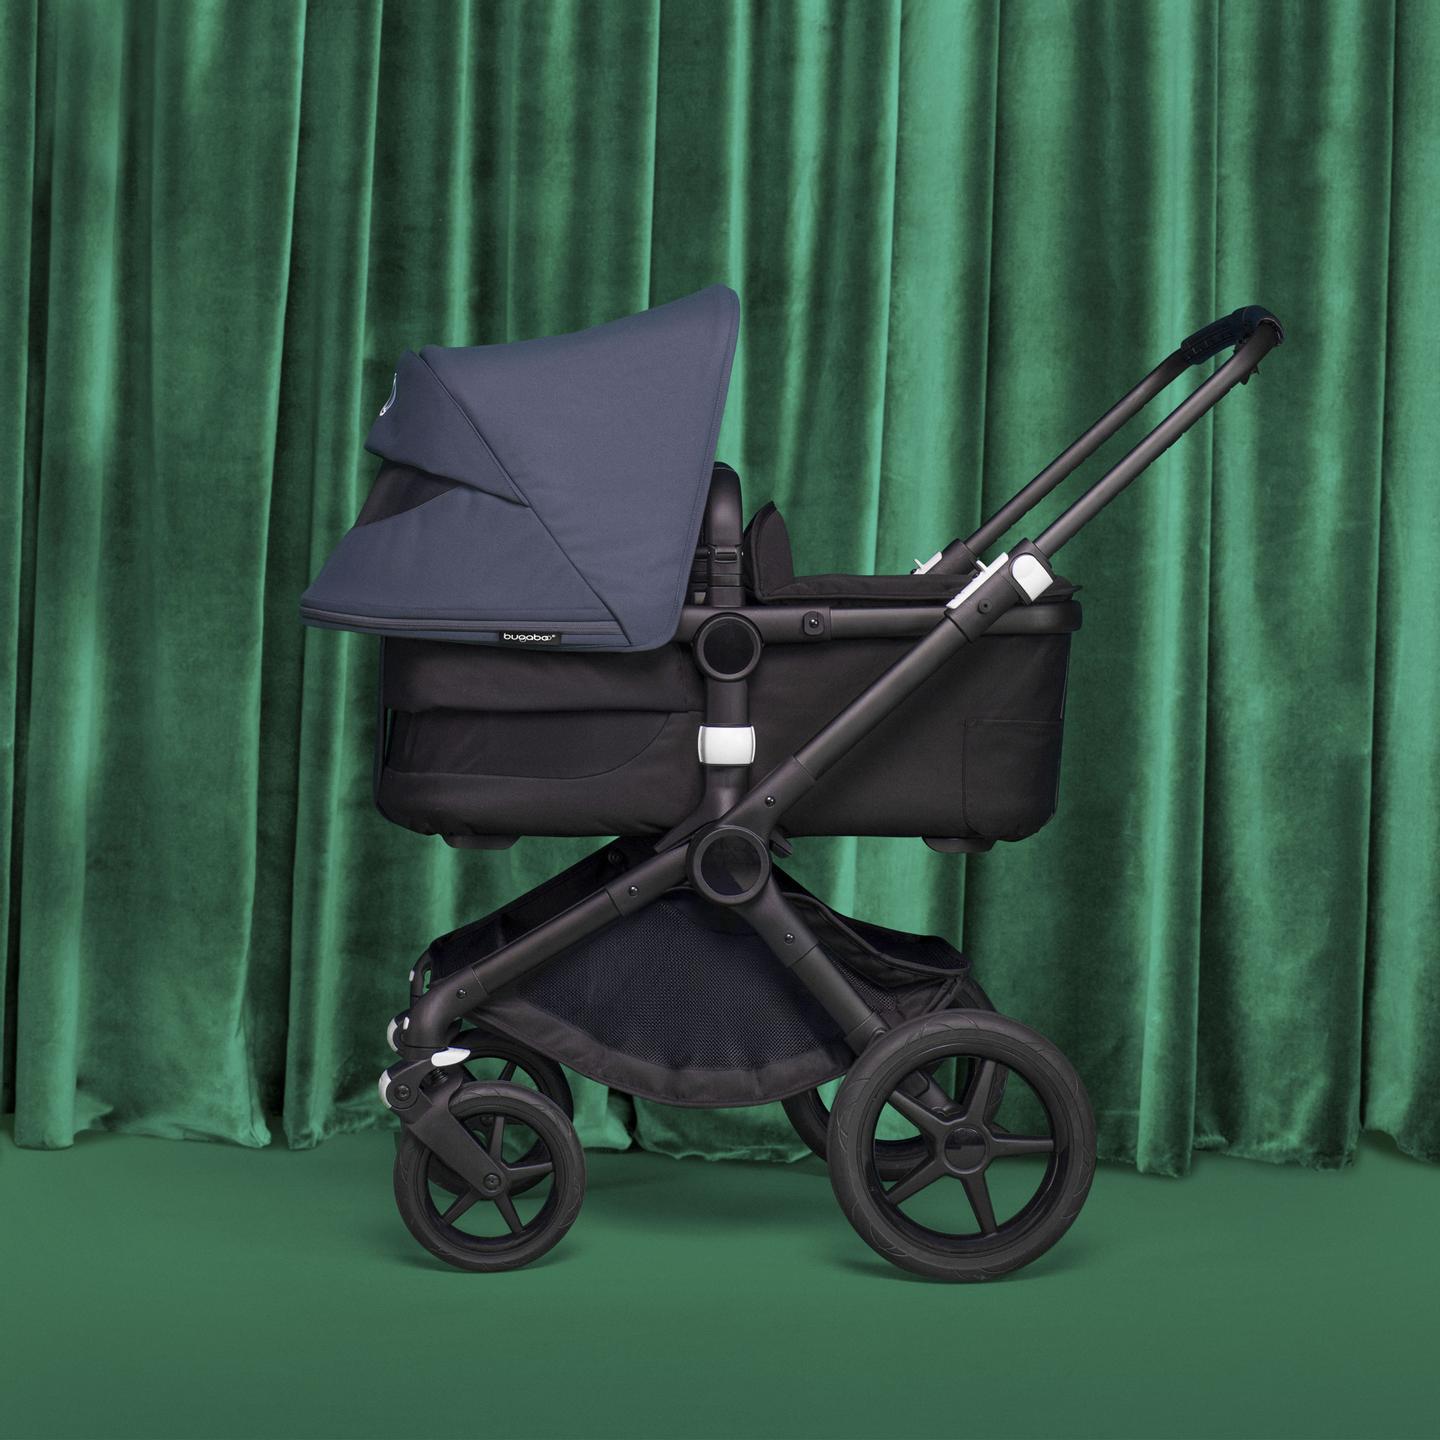 It is here! The new Bugaboo Fox 3